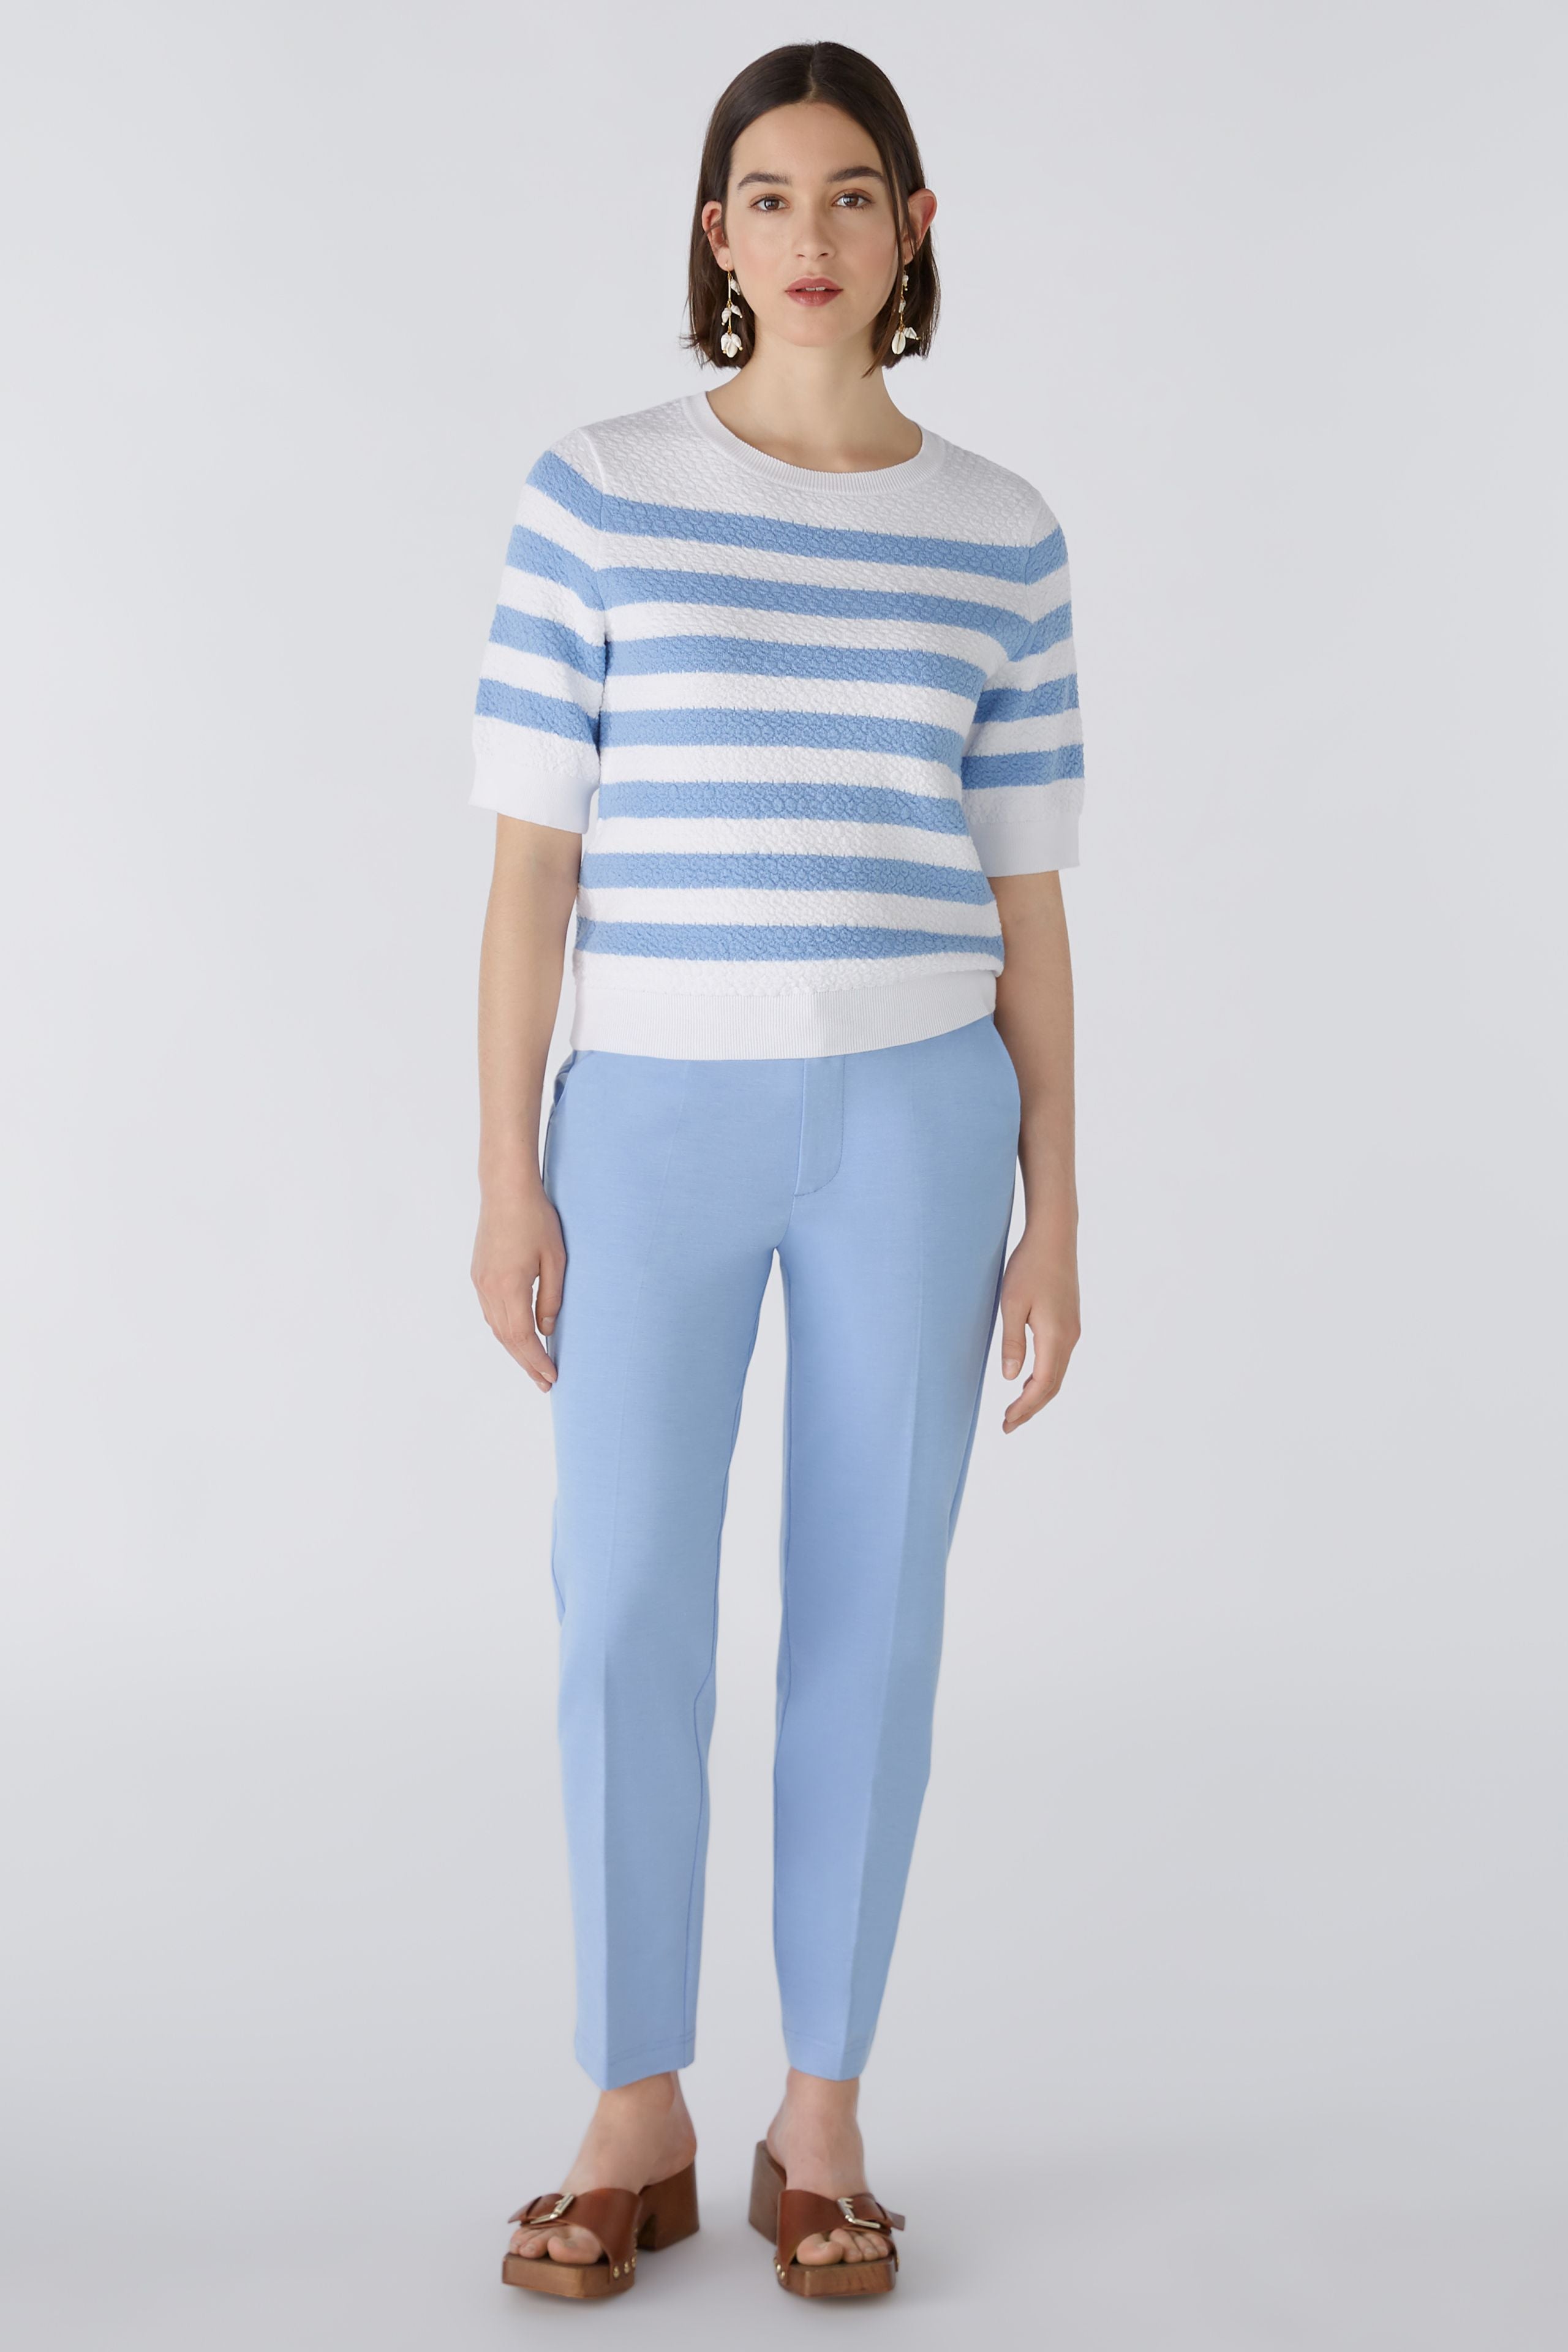 Knitted Stripe Jumper in Off White/Blue